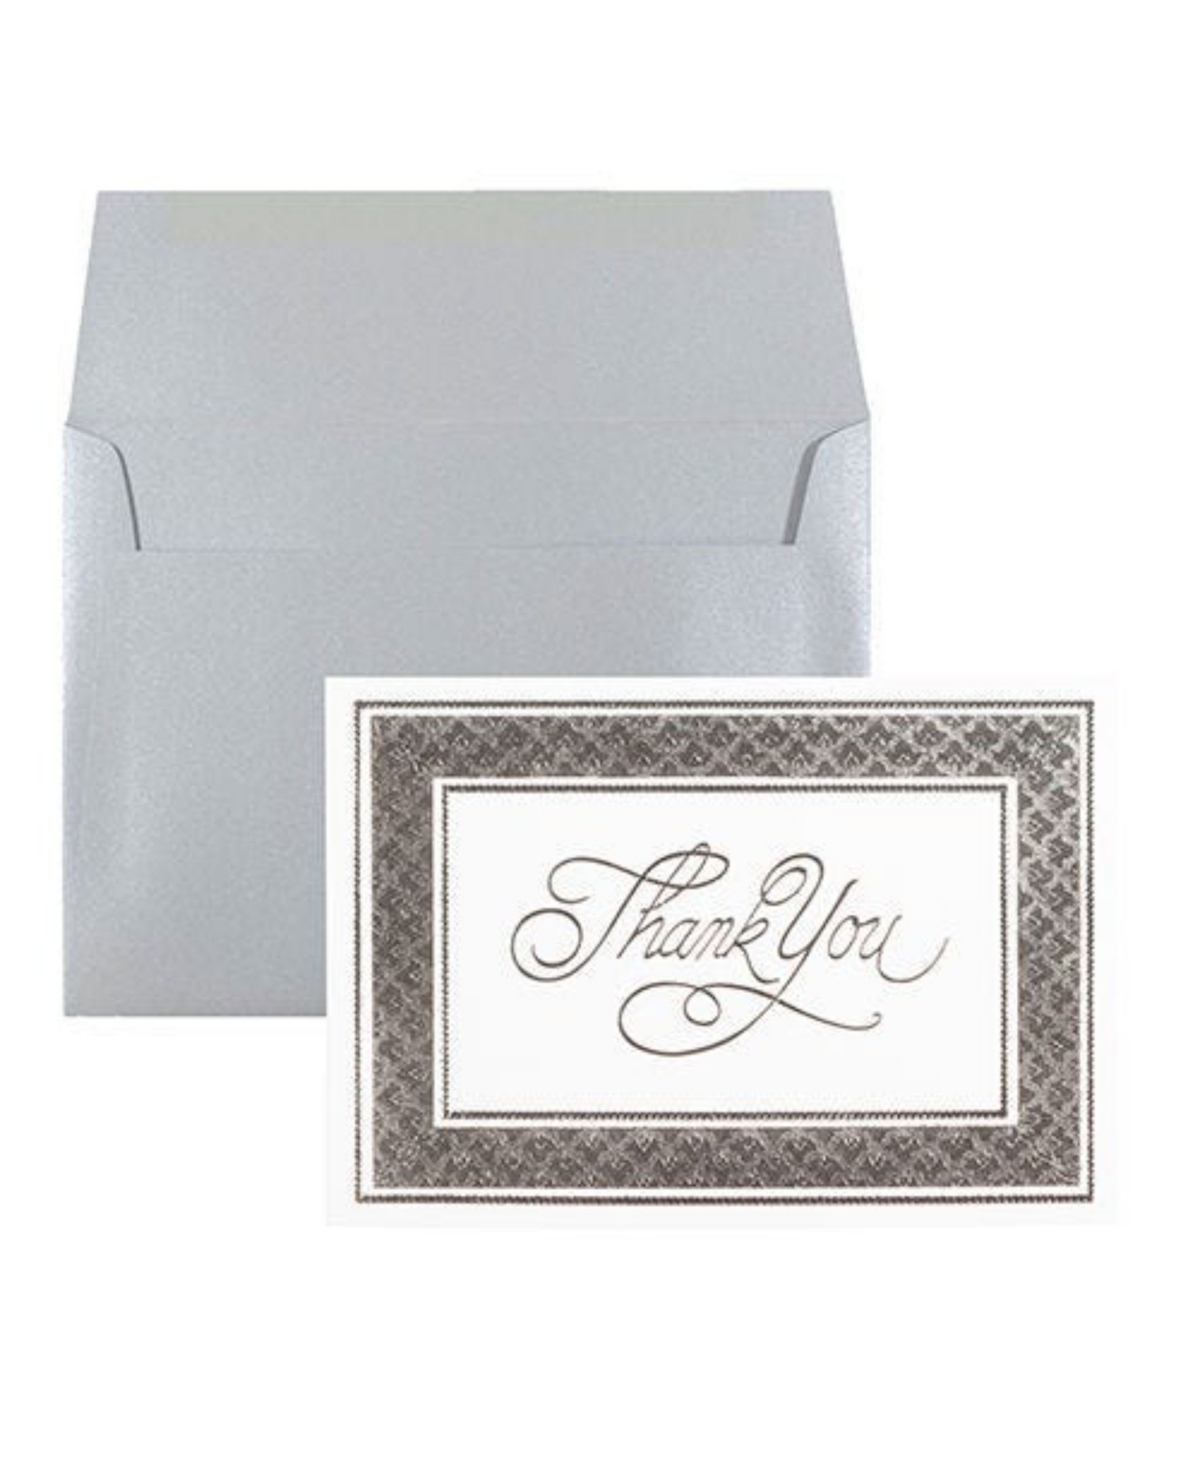 Thank You Card Sets - Star Dream Envelopes - 25 Cards and Envelopes - Silver Border Card with Silver Metallic